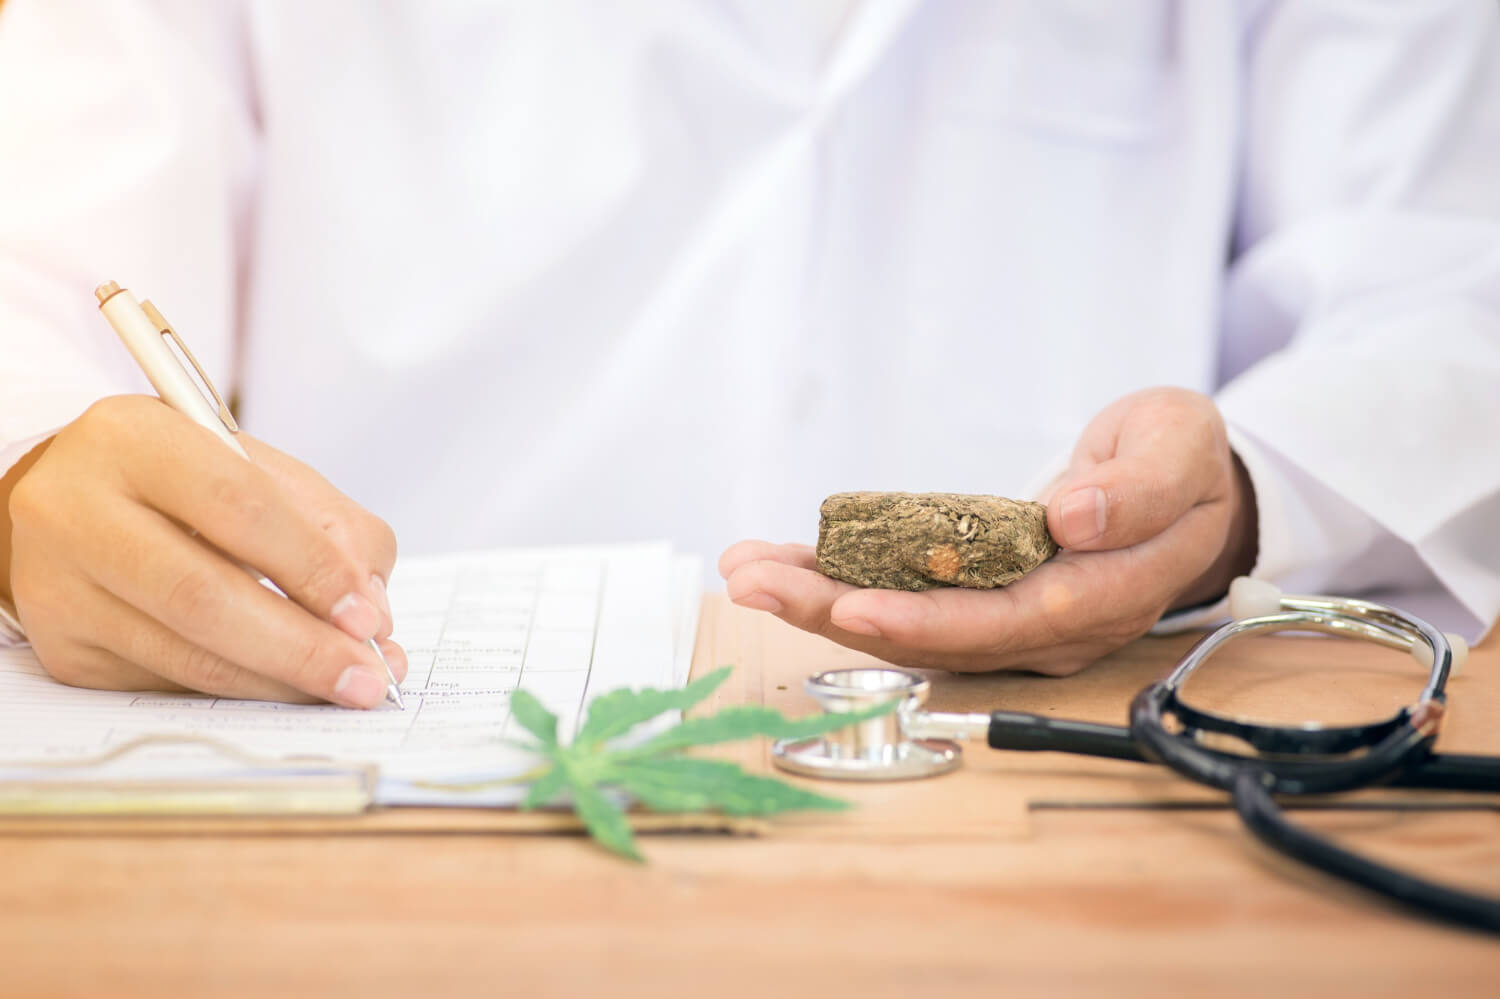 The Georgia DPH erroneously reported inaccurate numbers of people registered for its low-THC medical cannabis program